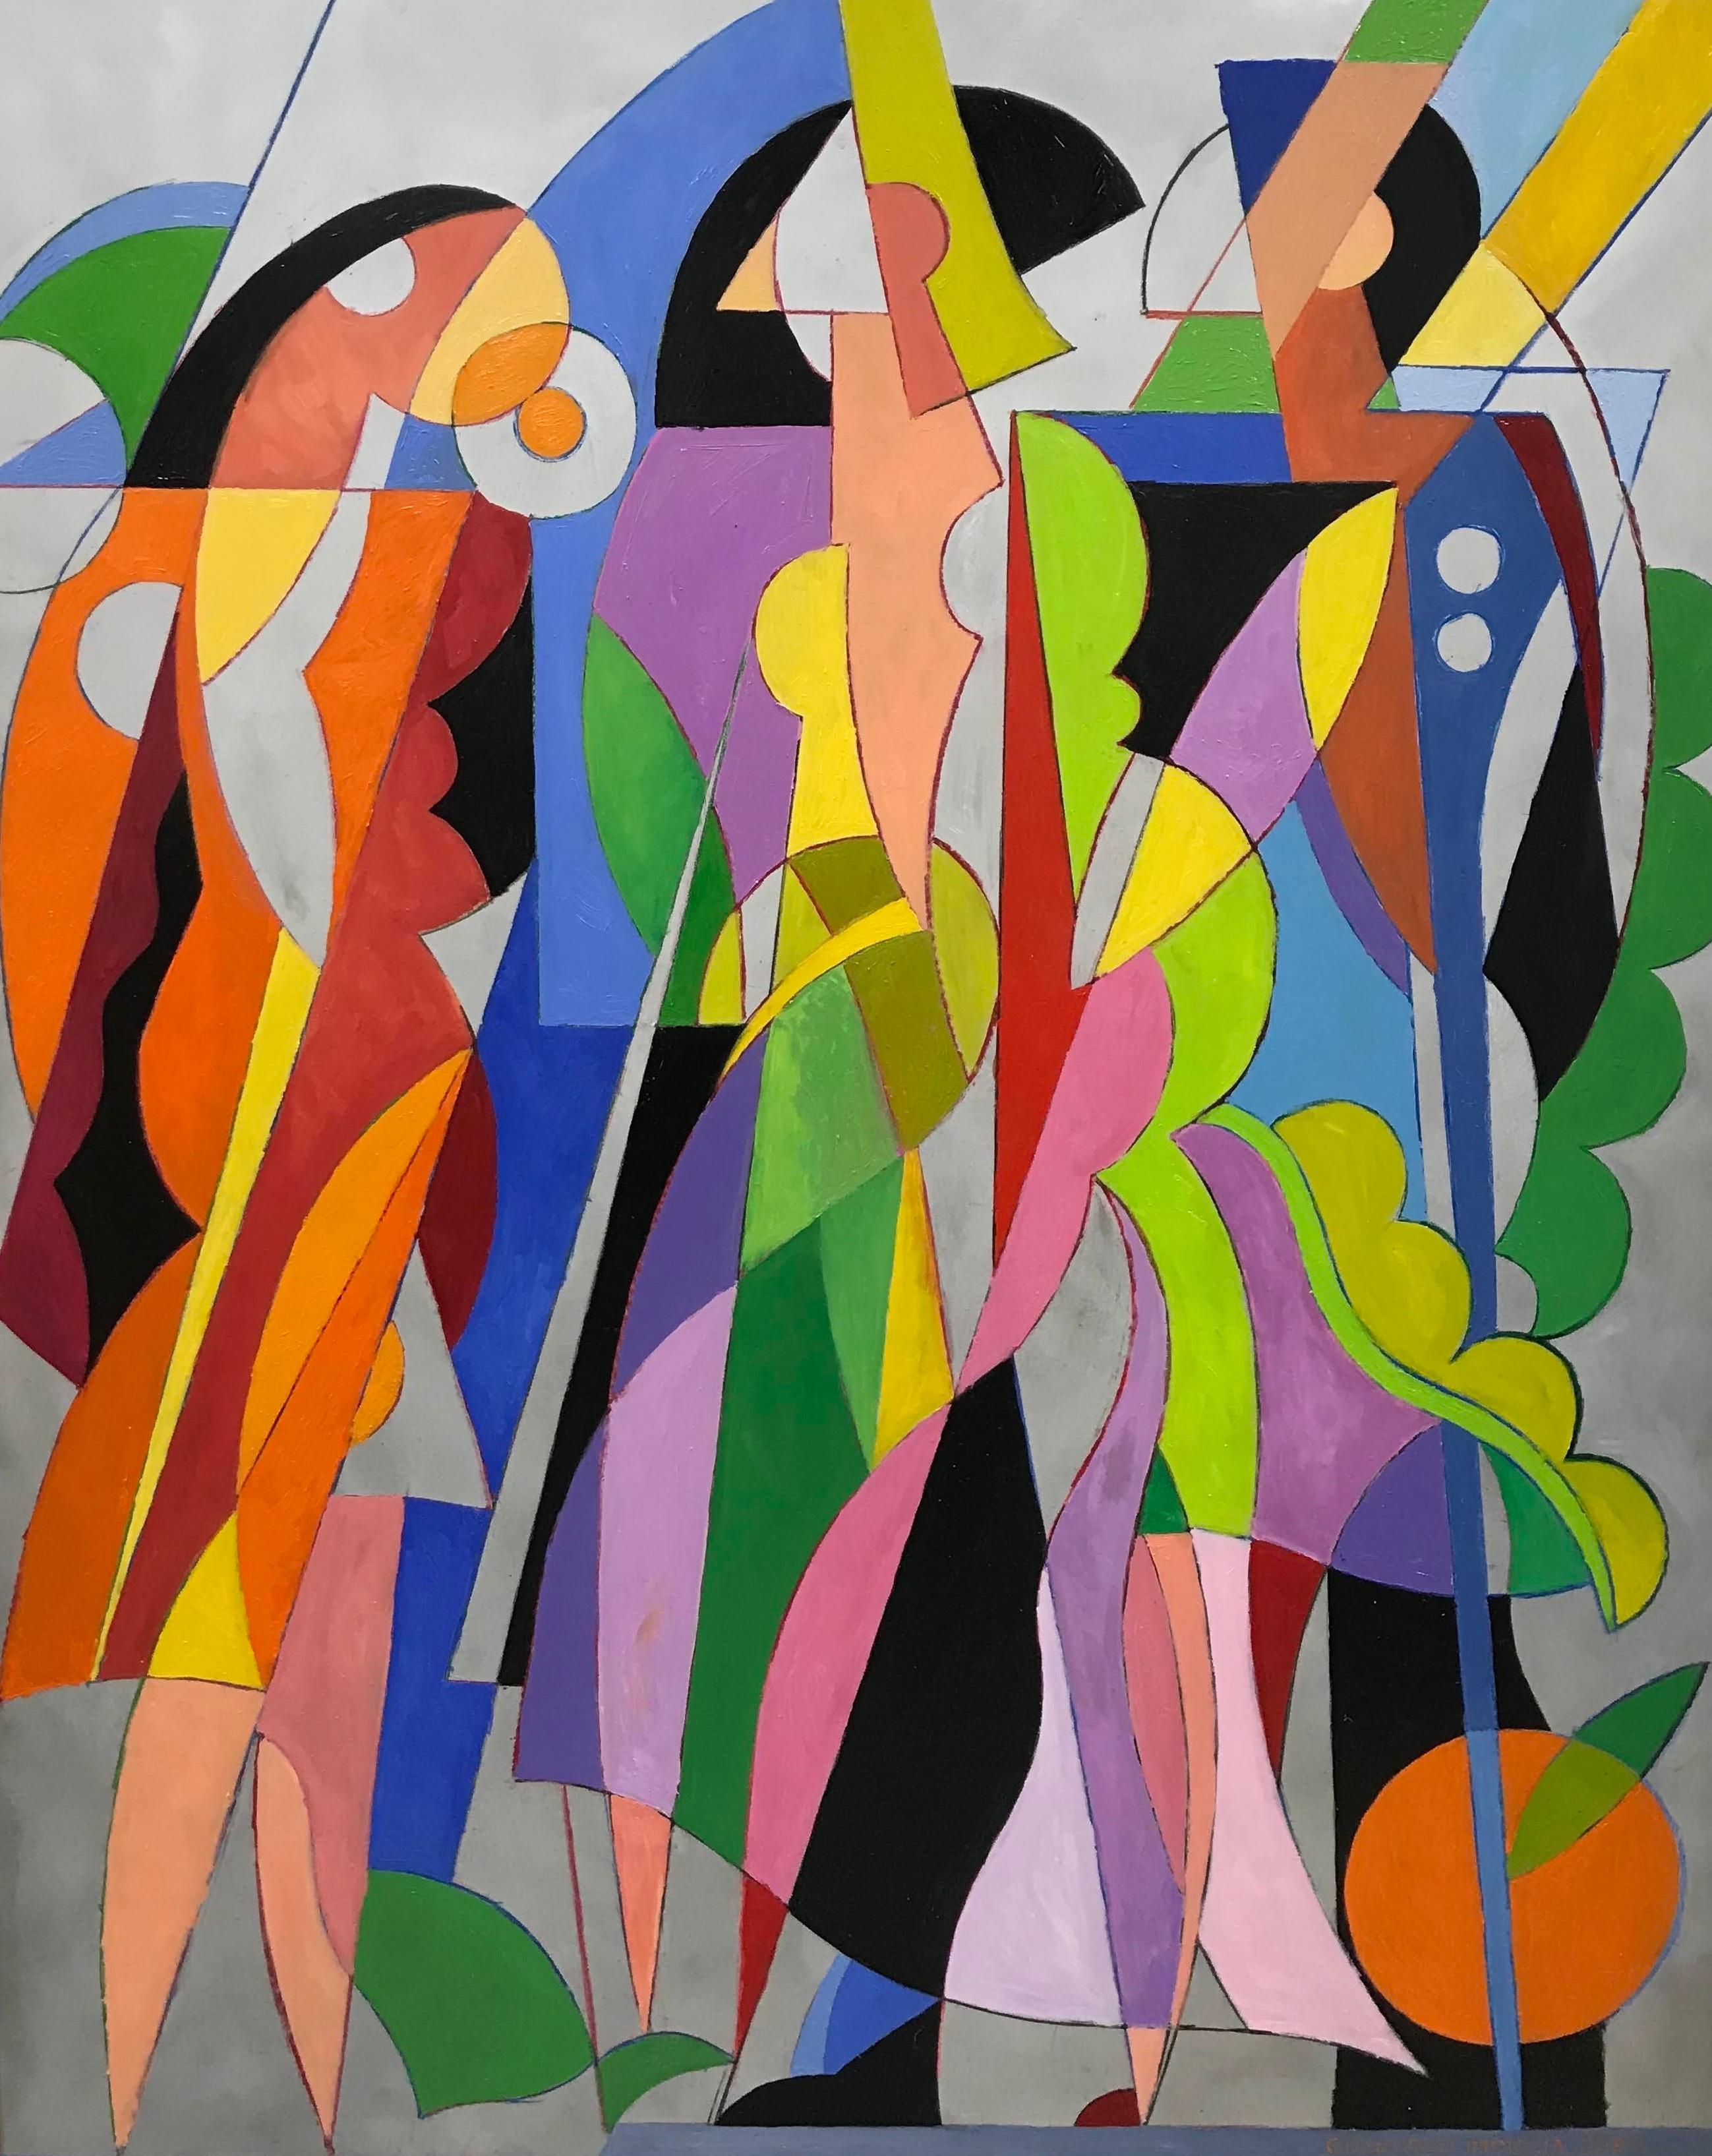 Giancarlo Impiglia Figurative Painting - Geometric, cubist, figurative contemporary oil painting, "Interrupted Games"  